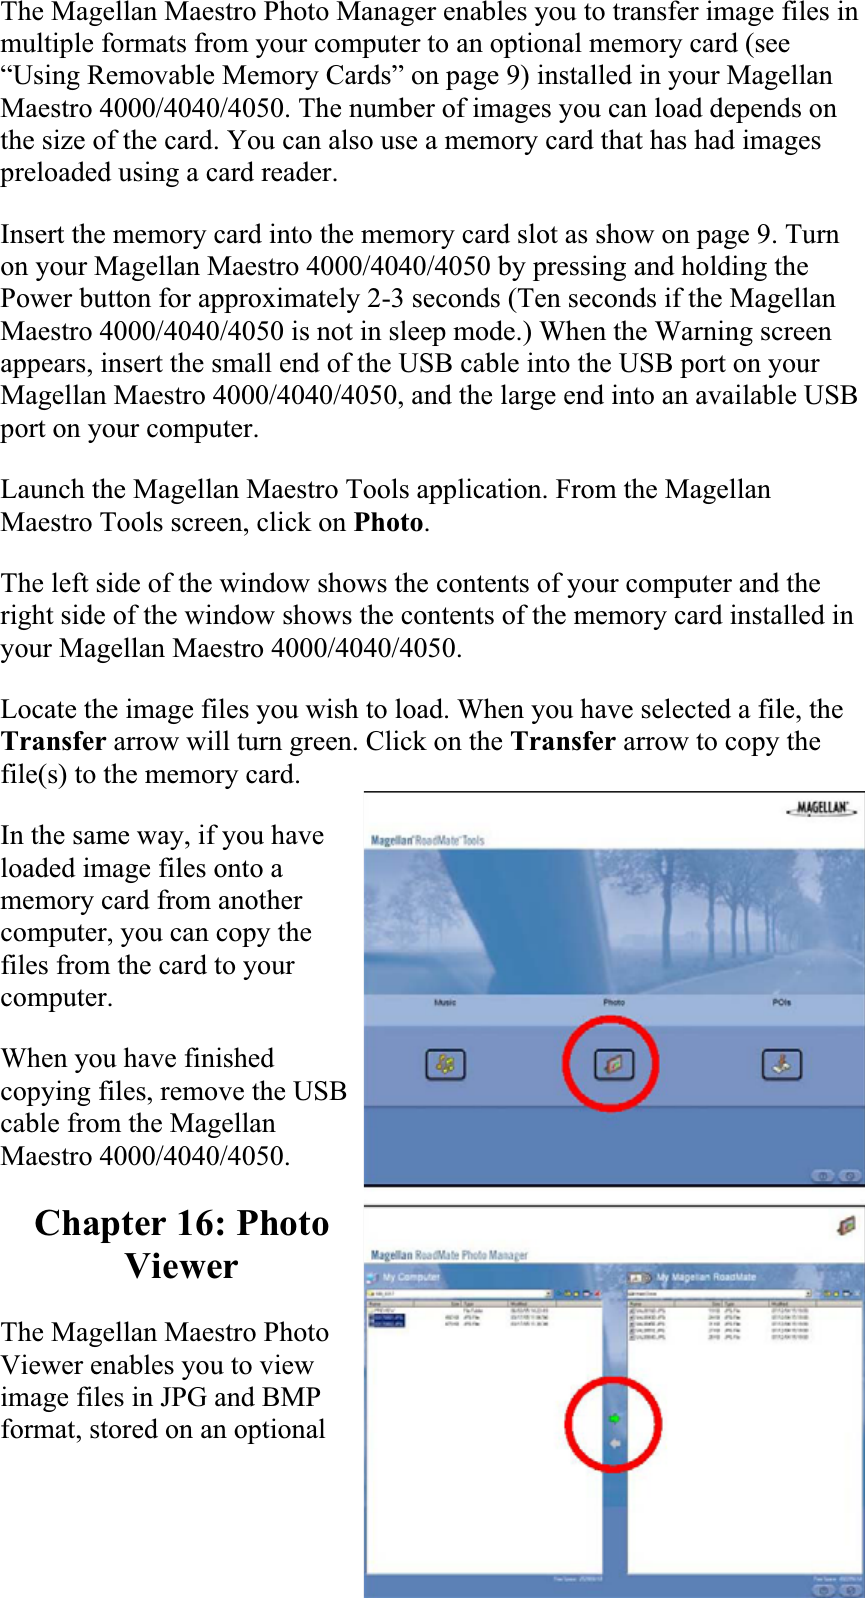 The Magellan Maestro Photo Manager enables you to transfer image files in multiple formats from your computer to an optional memory card (see “Using Removable Memory Cards” on page 9) installed in your Magellan Maestro 4000/4040/4050. The number of images you can load depends on the size of the card. You can also use a memory card that has had images preloaded using a card reader.  Insert the memory card into the memory card slot as show on page 9. Turn on your Magellan Maestro 4000/4040/4050 by pressing and holding the Power button for approximately 2-3 seconds (Ten seconds if the Magellan Maestro 4000/4040/4050 is not in sleep mode.) When the Warning screen appears, insert the small end of the USB cable into the USB port on your Magellan Maestro 4000/4040/4050, and the large end into an available USB port on your computer.  Launch the Magellan Maestro Tools application. From the Magellan Maestro Tools screen, click on Photo.The left side of the window shows the contents of your computer and the right side of the window shows the contents of the memory card installed in your Magellan Maestro 4000/4040/4050.Locate the image files you wish to load. When you have selected a file, the Transfer arrow will turn green. Click on the Transfer arrow to copy the file(s) to the memory card.  In the same way, if you have loaded image files onto a memory card from another computer, you can copy the files from the card to your computer.  When you have finished copying files, remove the USB cable from the Magellan Maestro 4000/4040/4050.  Chapter 16: Photo ViewerThe Magellan Maestro Photo Viewer enables you to view image files in JPG and BMP format, stored on an optional 